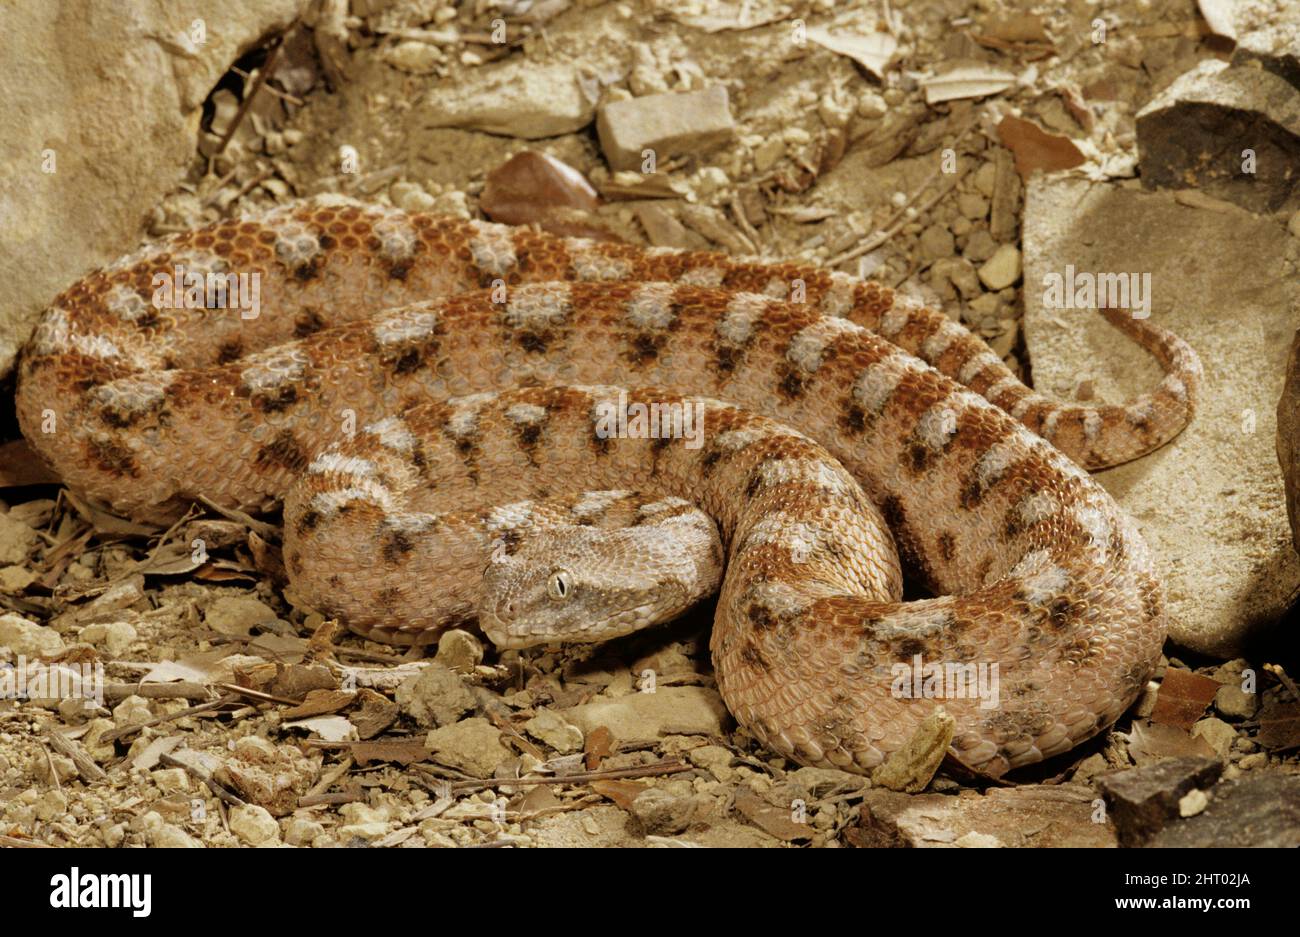 Painted saw-scaled viper (Echis coloratus), a venomous snakes which occurs in rocky deserts in the Middle East. Arabian Peninsula Stock Photo